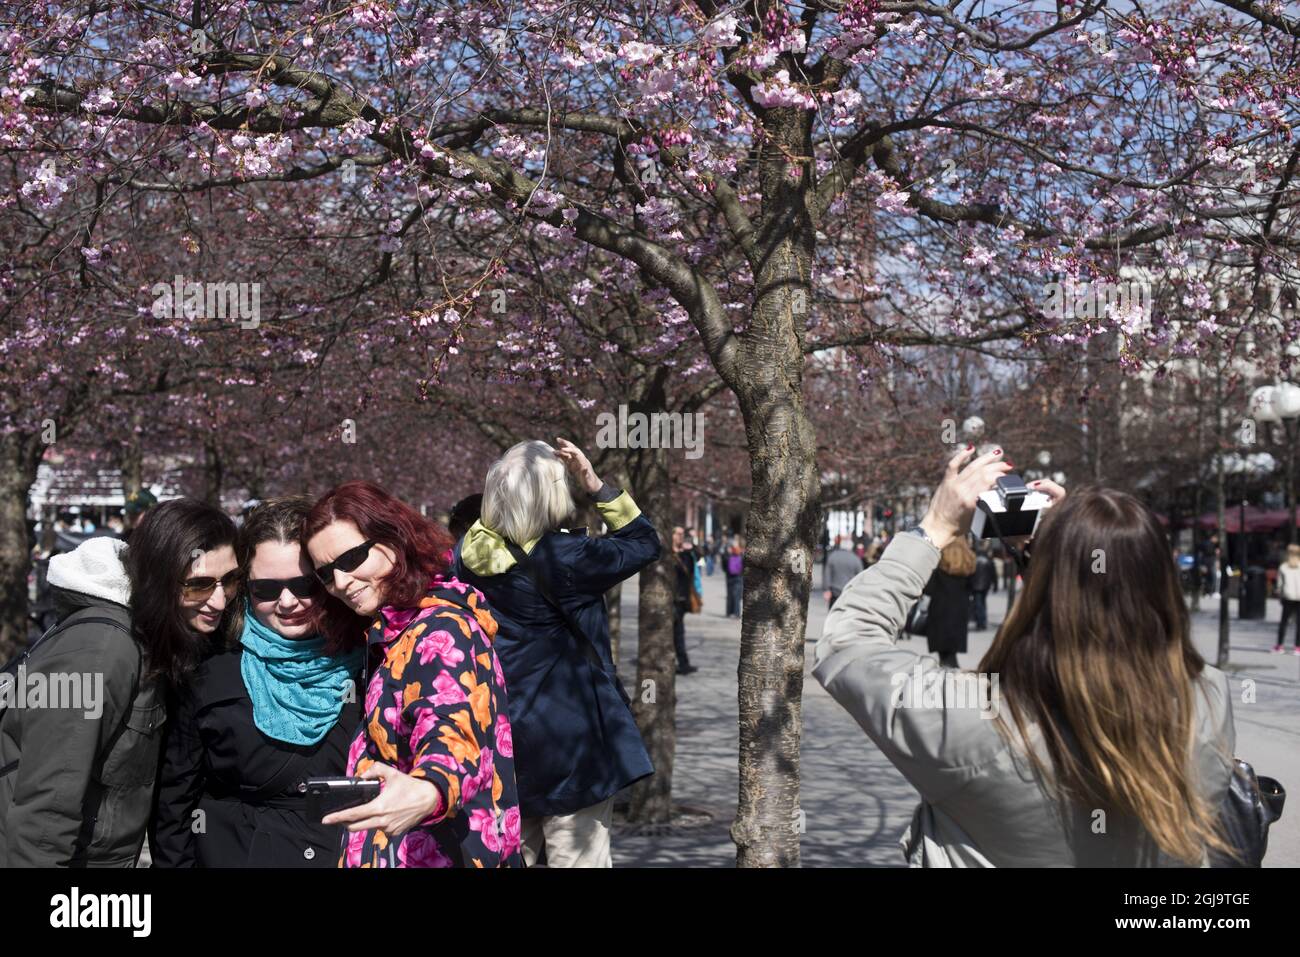 Visitors take a selfie with blooming cherry trees in the background in Kungstradgarden park in Stockholm, Sweden, on April 15, 2016. Weather forecasts predict changeable weather conditions with about 10 degrees Celcius in Stockholm during the weekend. Photo: Henrik Montgomery / TT / code 10060 Stock Photo